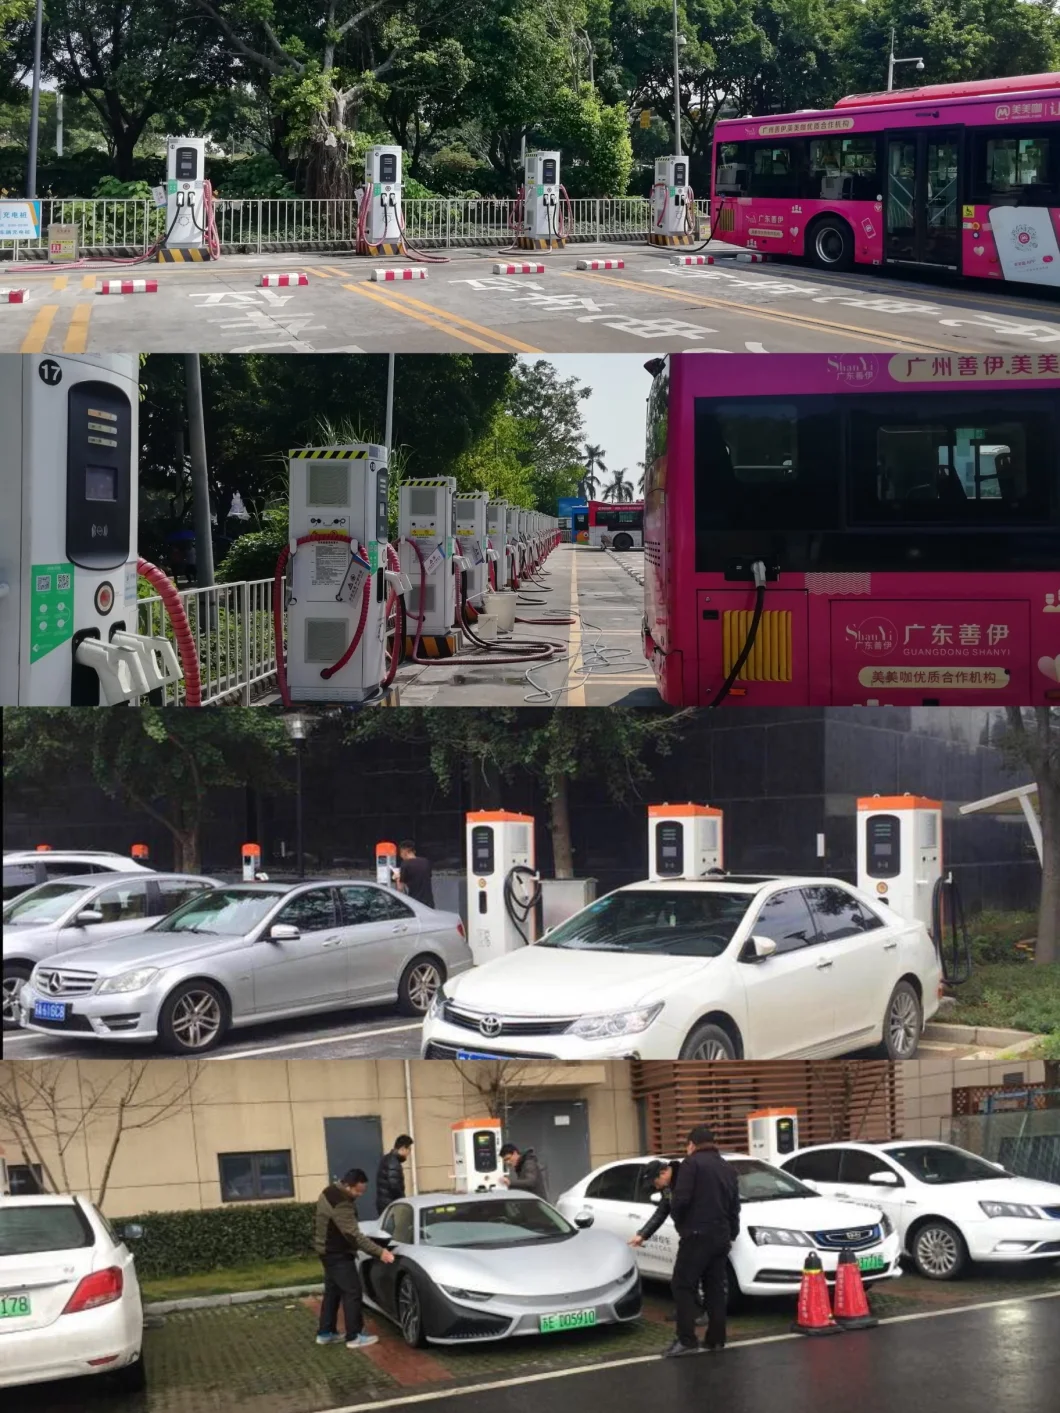 54kw CCS2 All-in-One DC/EV Fast Charger for Electric Car, Truck, Bus/Charging Station